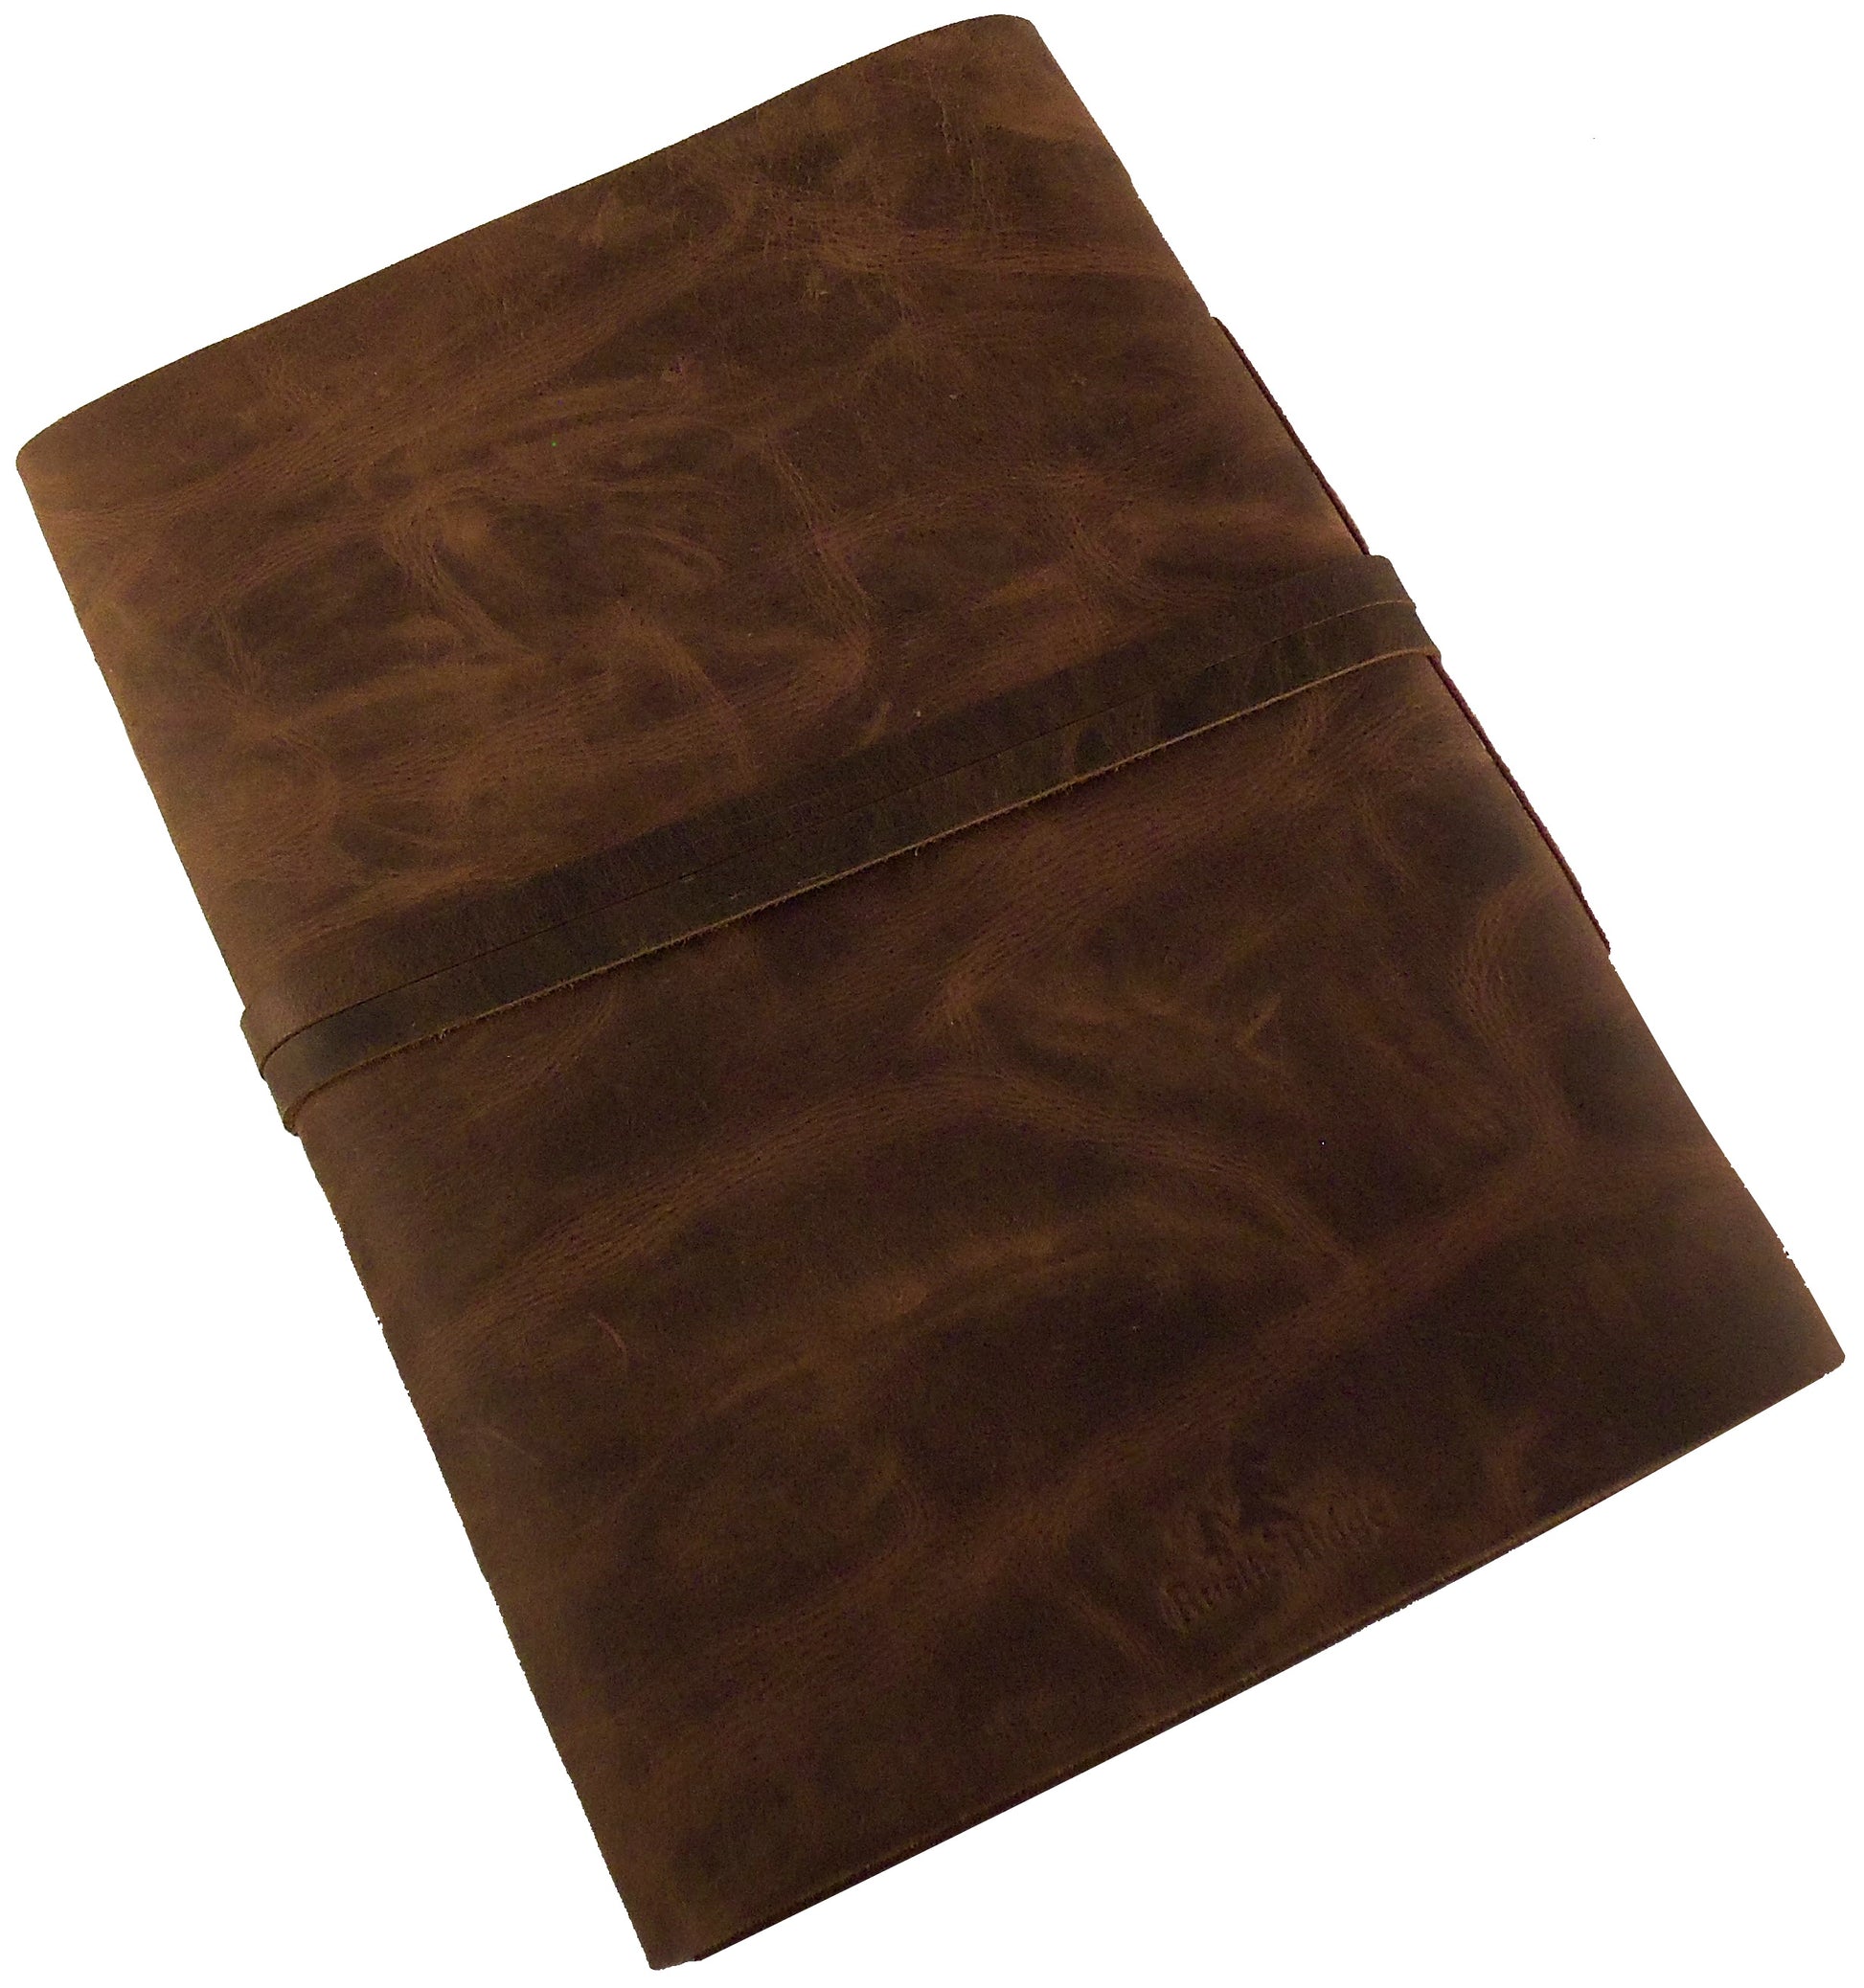 Large Genuine Leather Scrapbook Photo Album with Gift Box - Holds 200 4x6 or 5x7 Photos - 9x12" - Rustic Ridge Leather